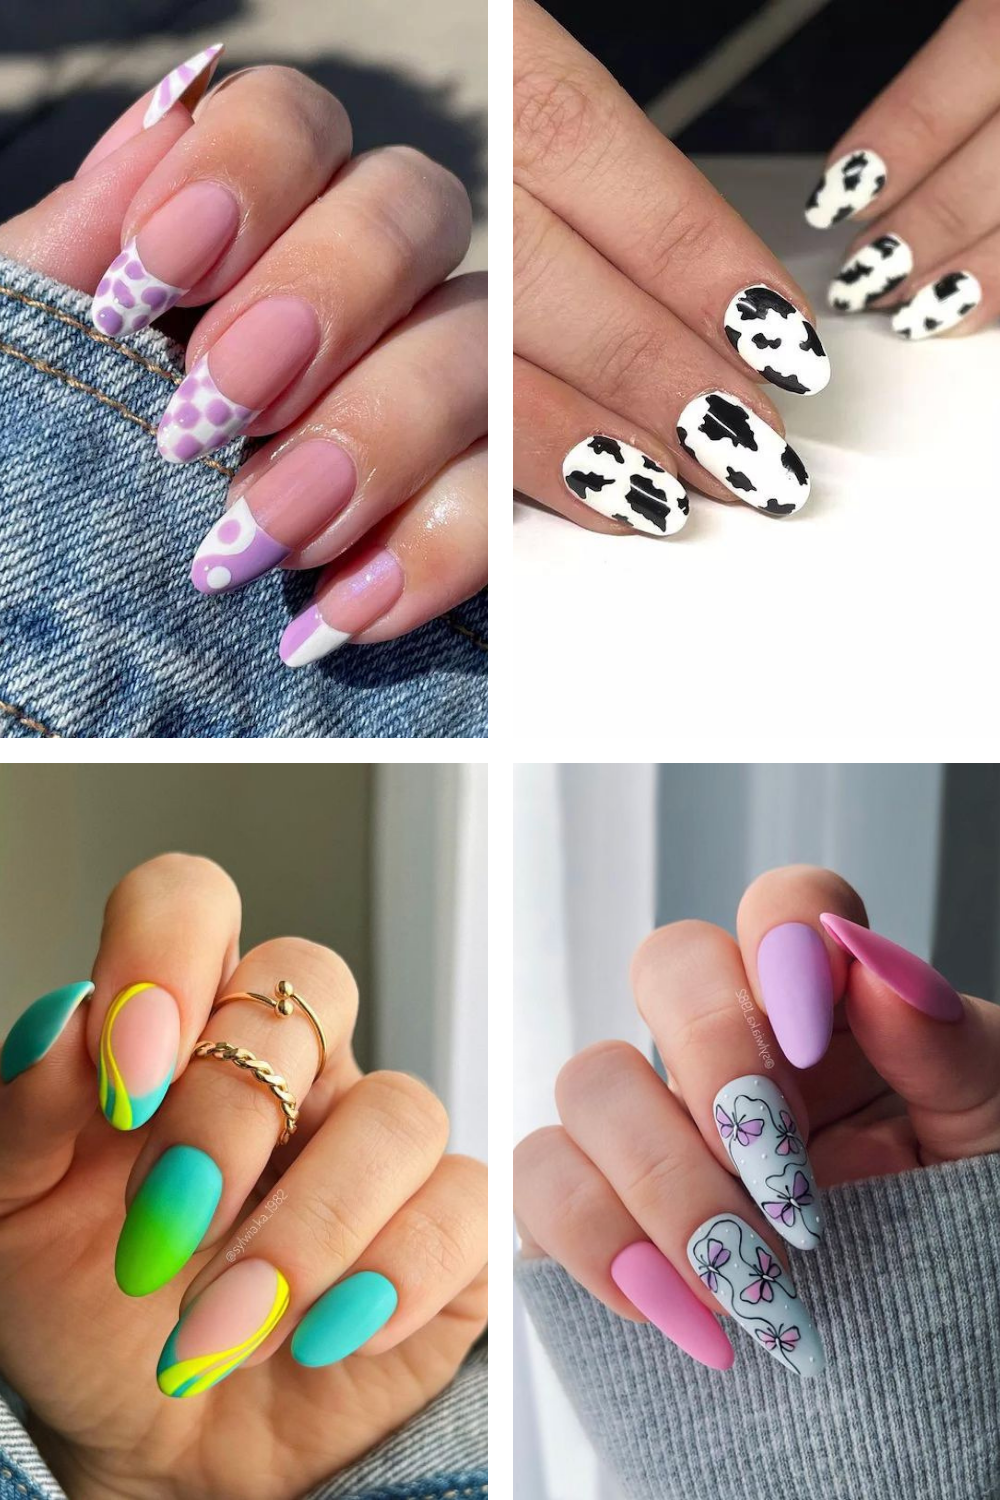 41 Amazing April Nails That Are Picture Perfect!